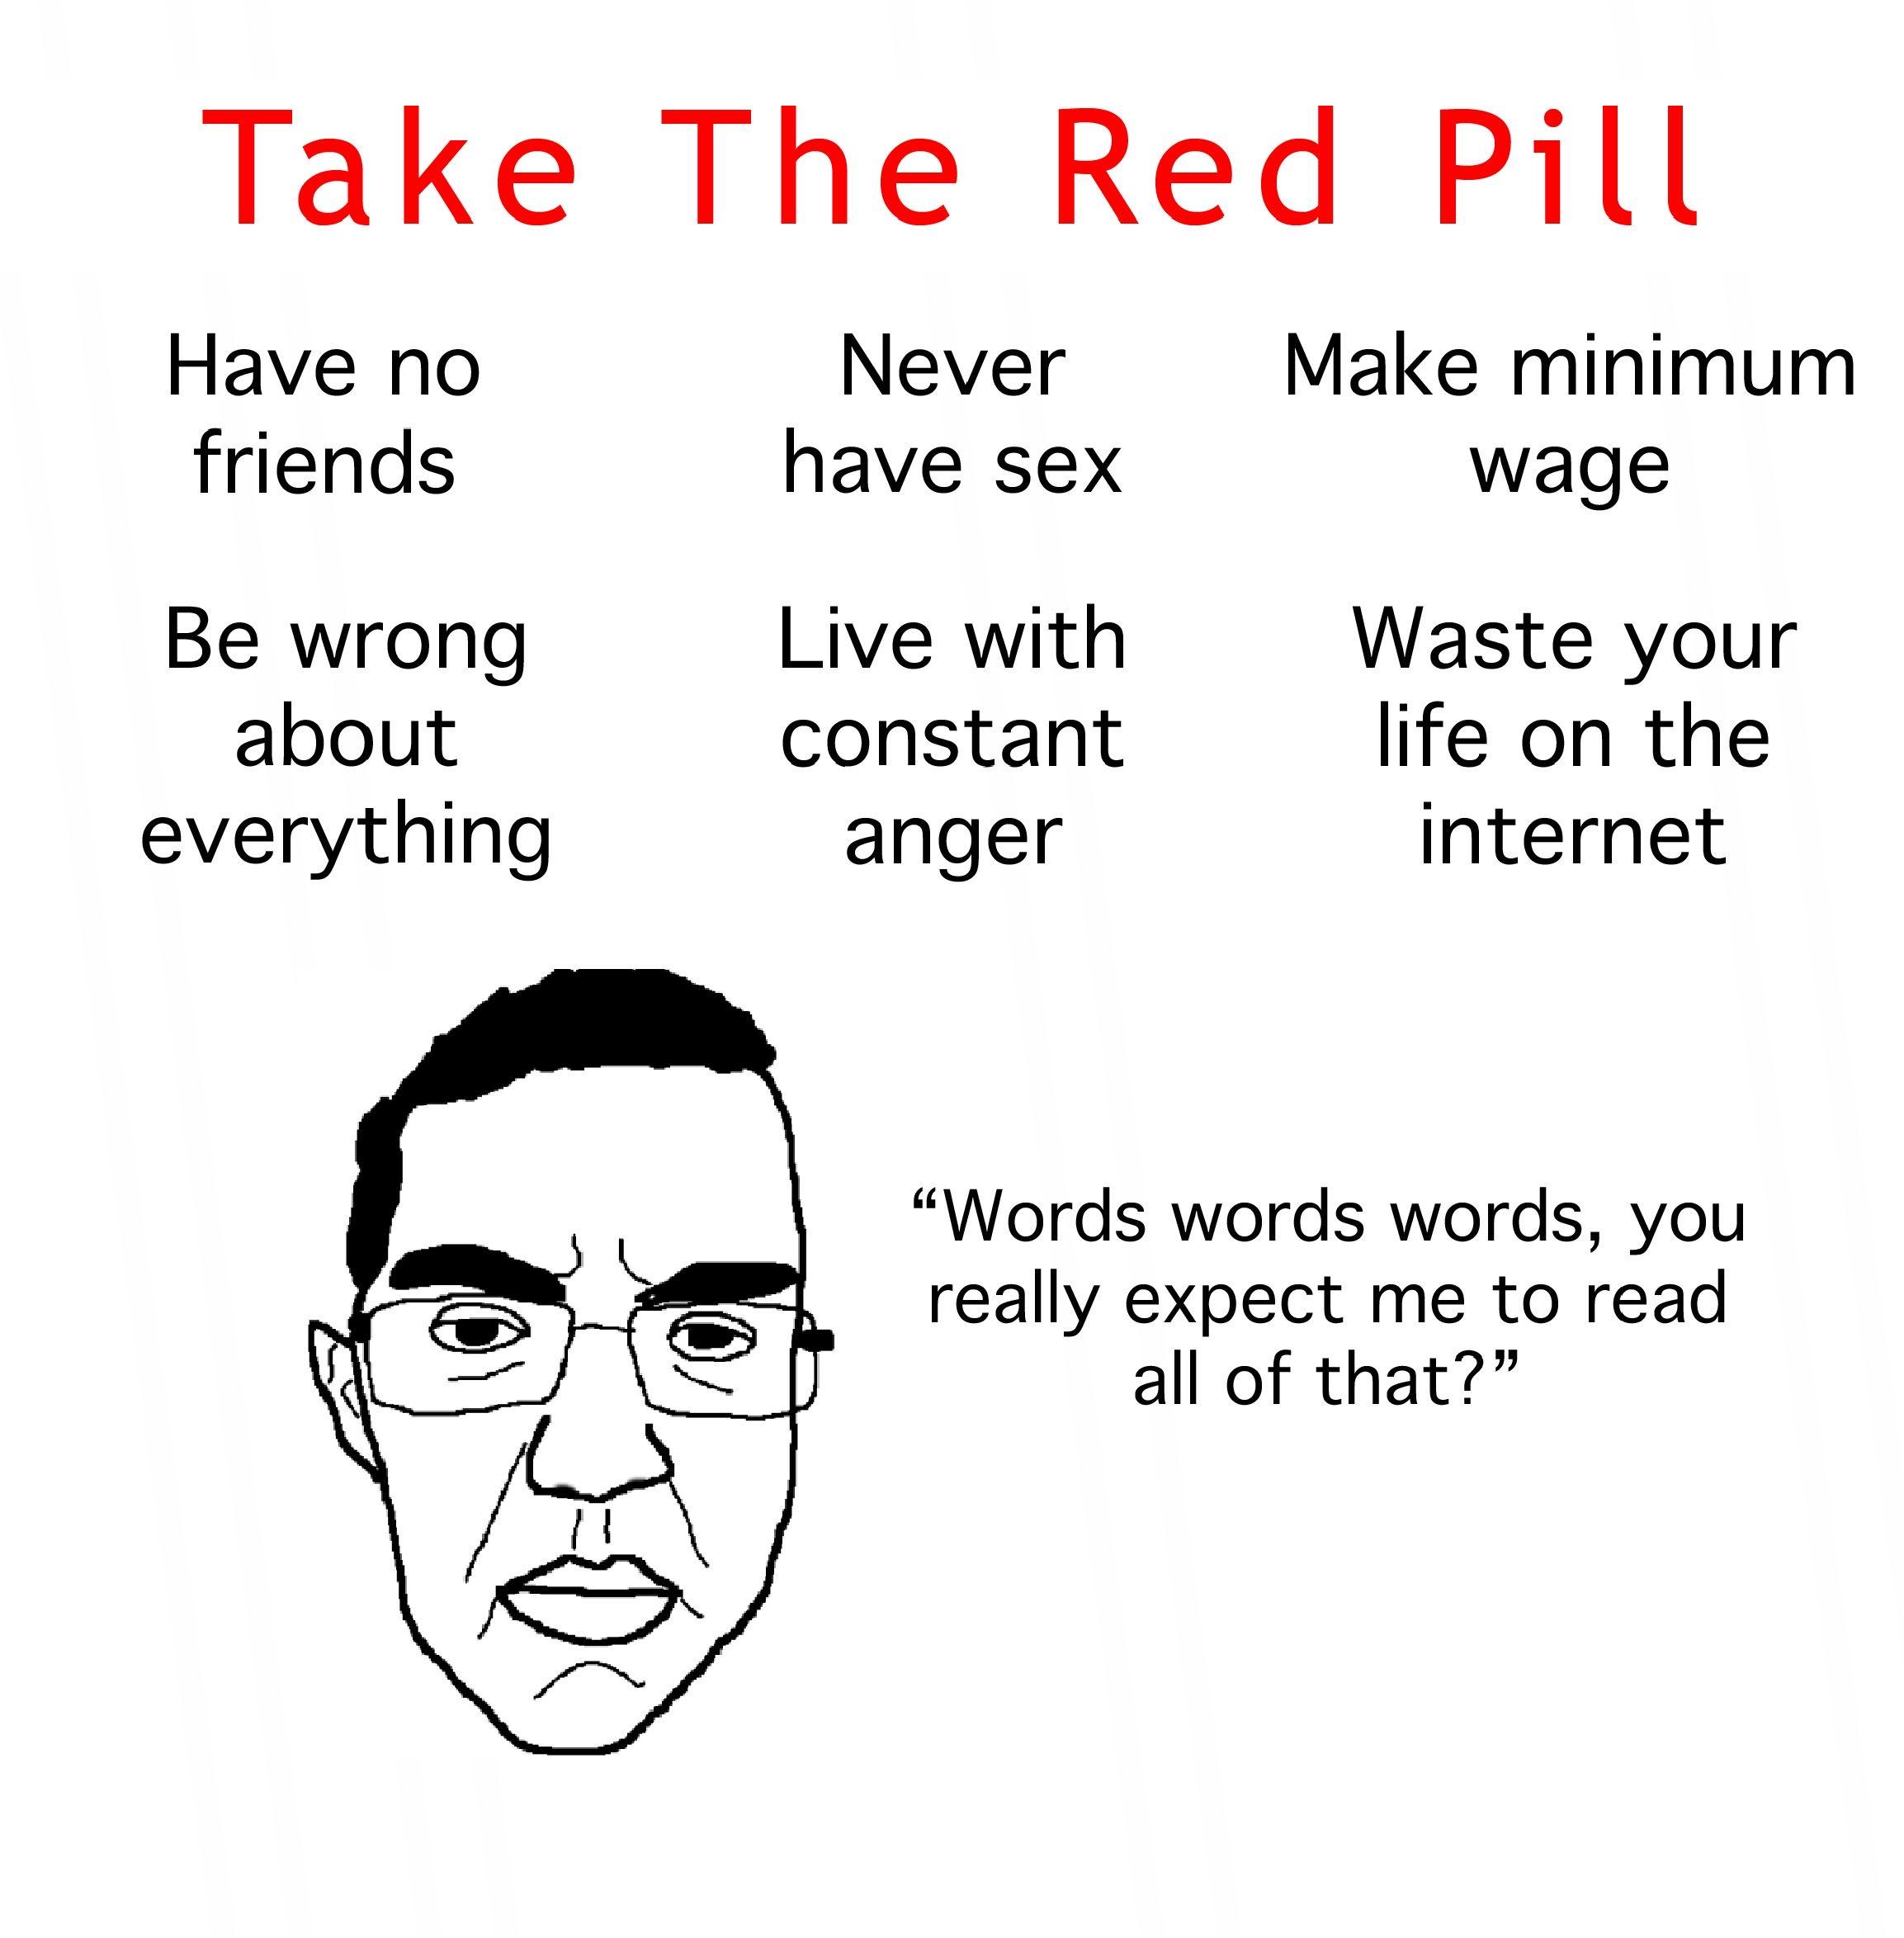 Red pill people